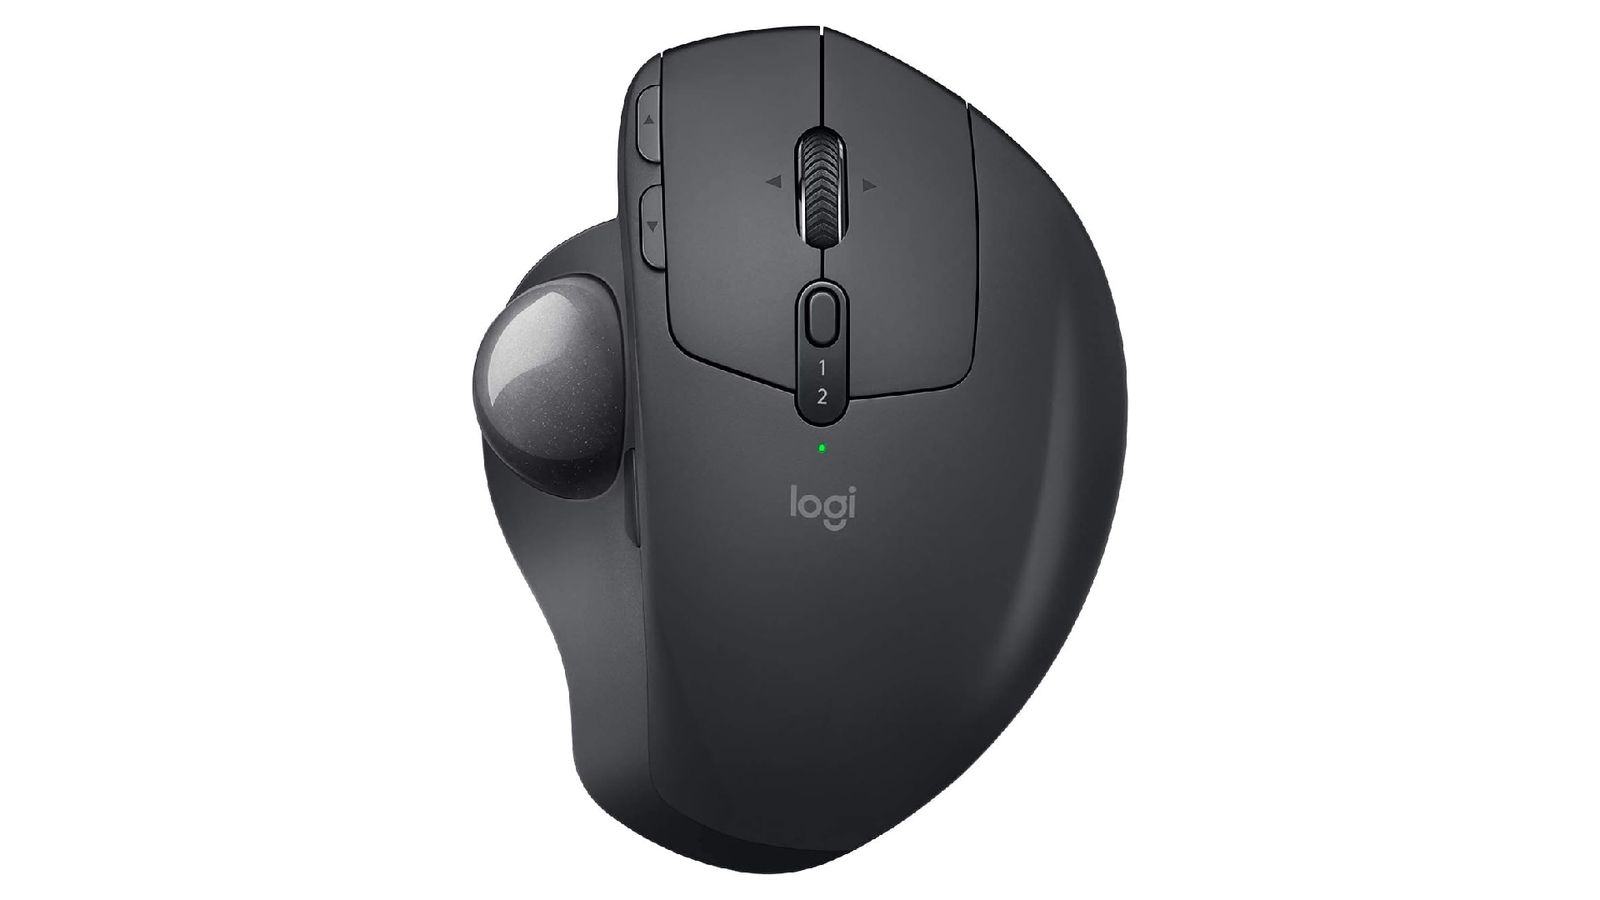 Logitech MX Ergo product image of a graphite mouse with a lighter grey trackball on the left side.